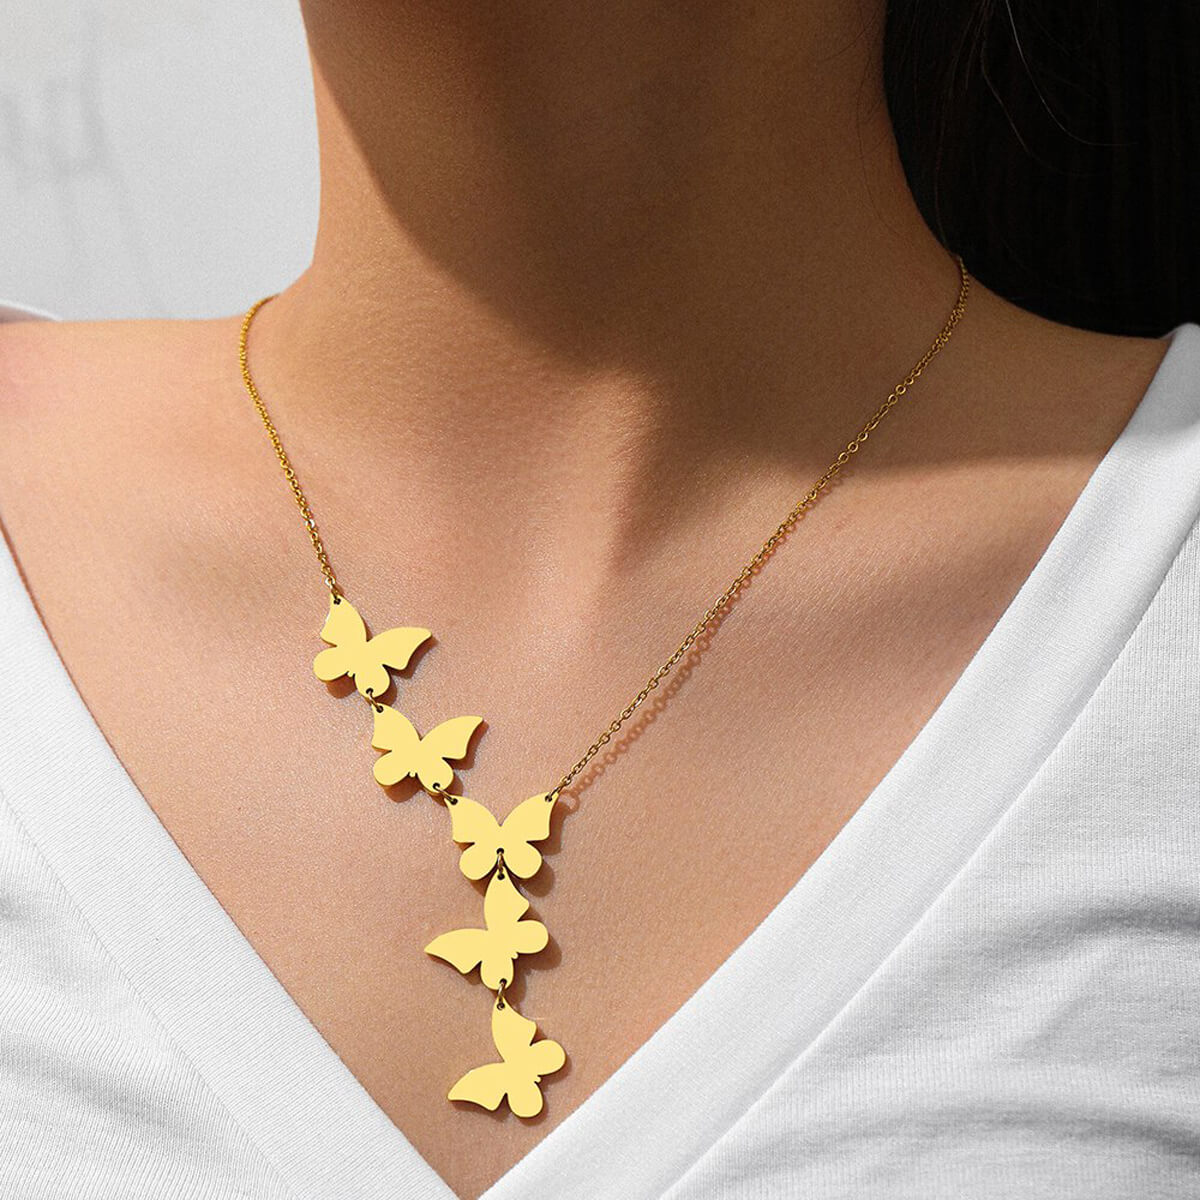 Butterflies In The Sky Necklace Gold Stainless Steel Jewelry